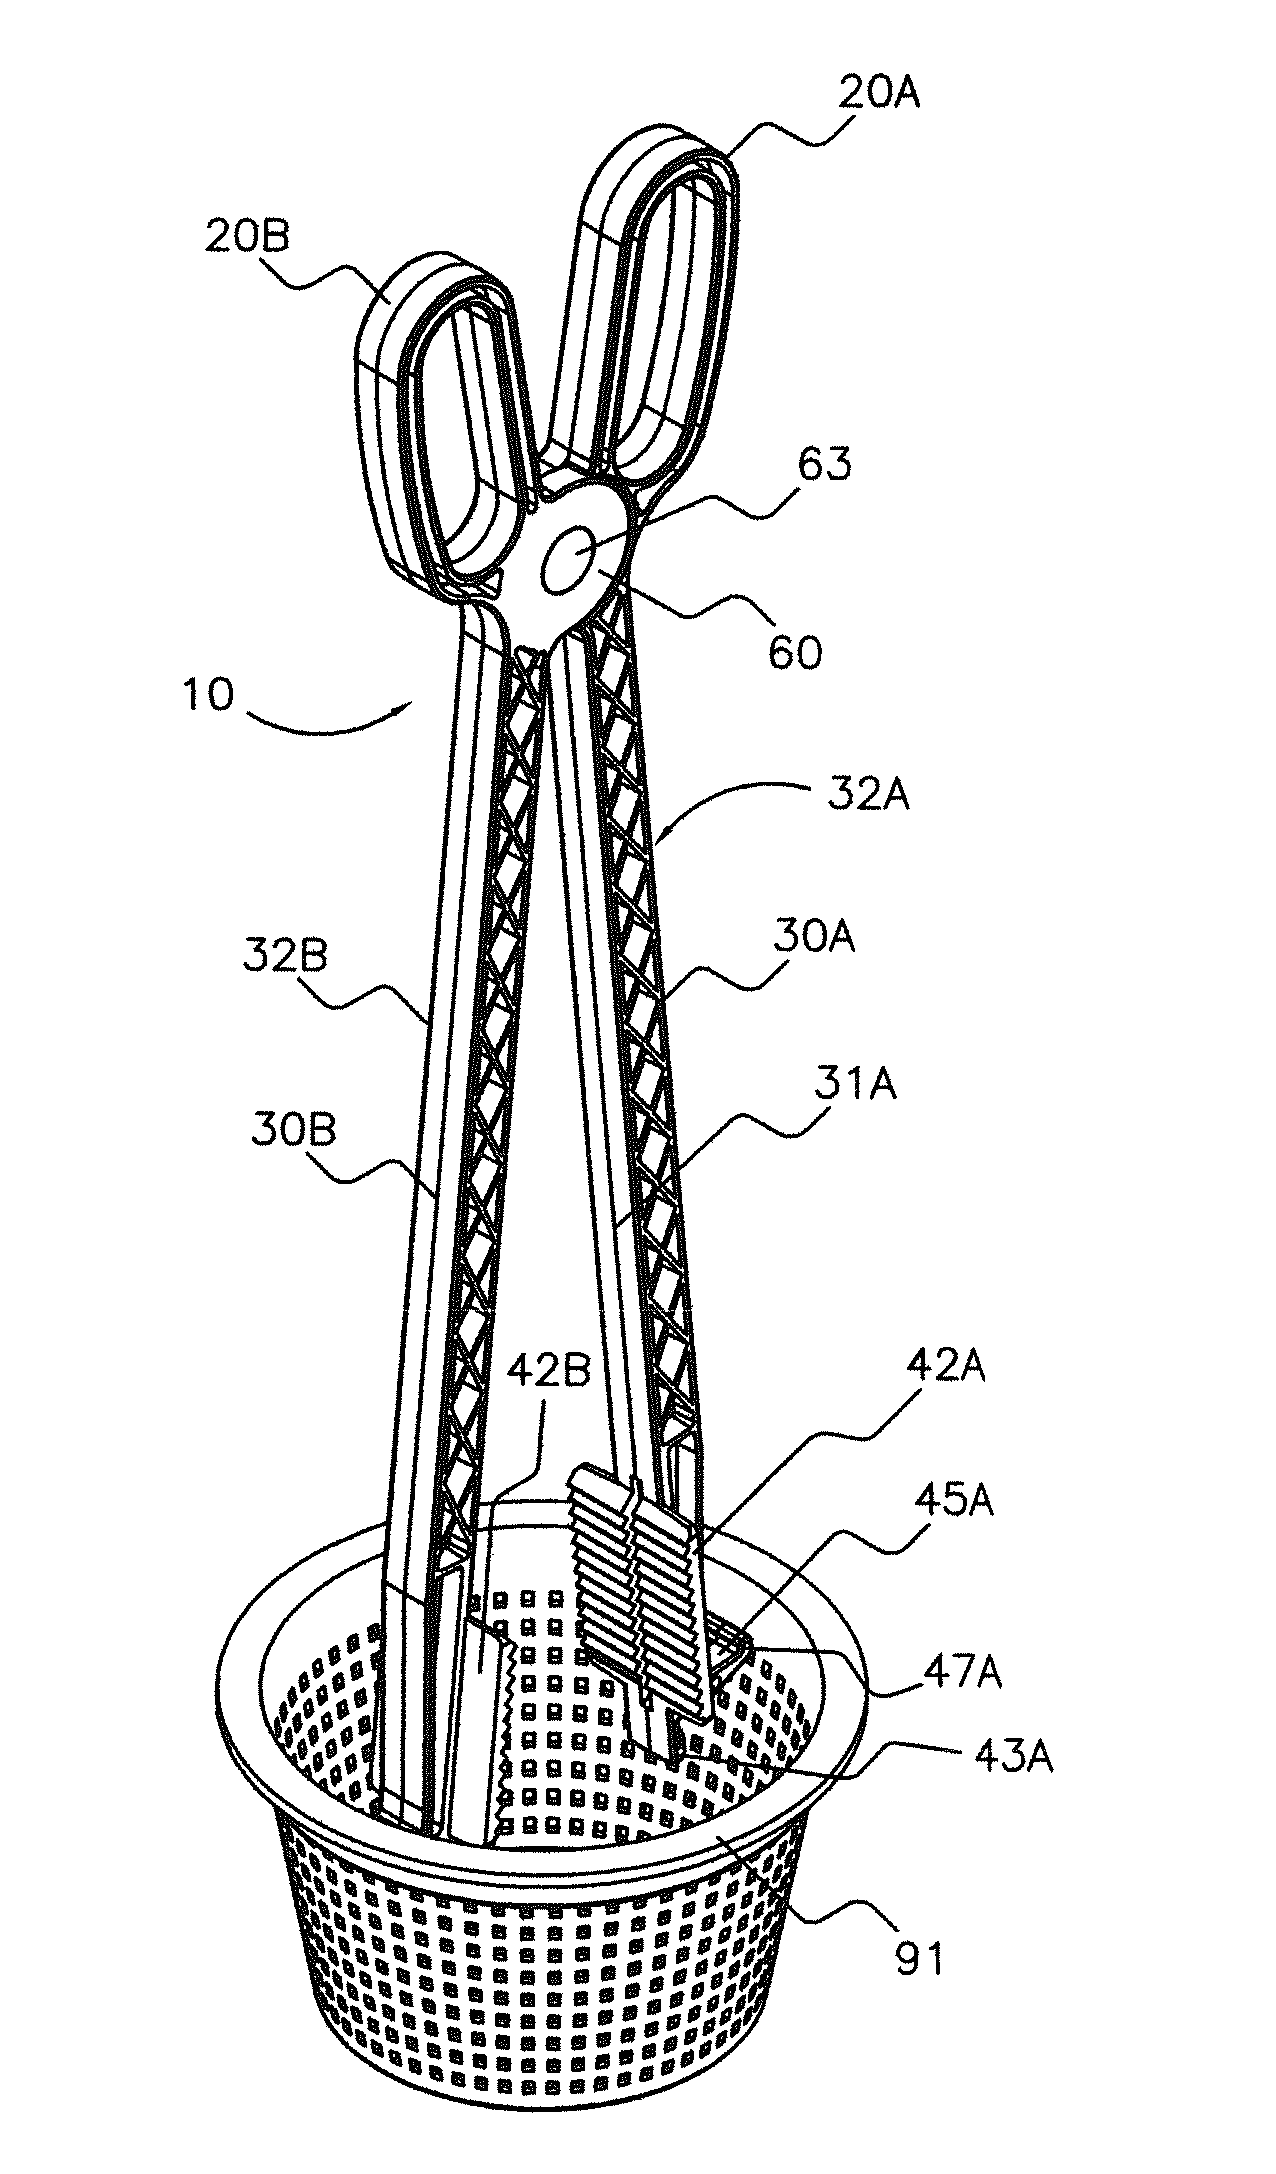 Tool for removing a swimming pool skimmer basket